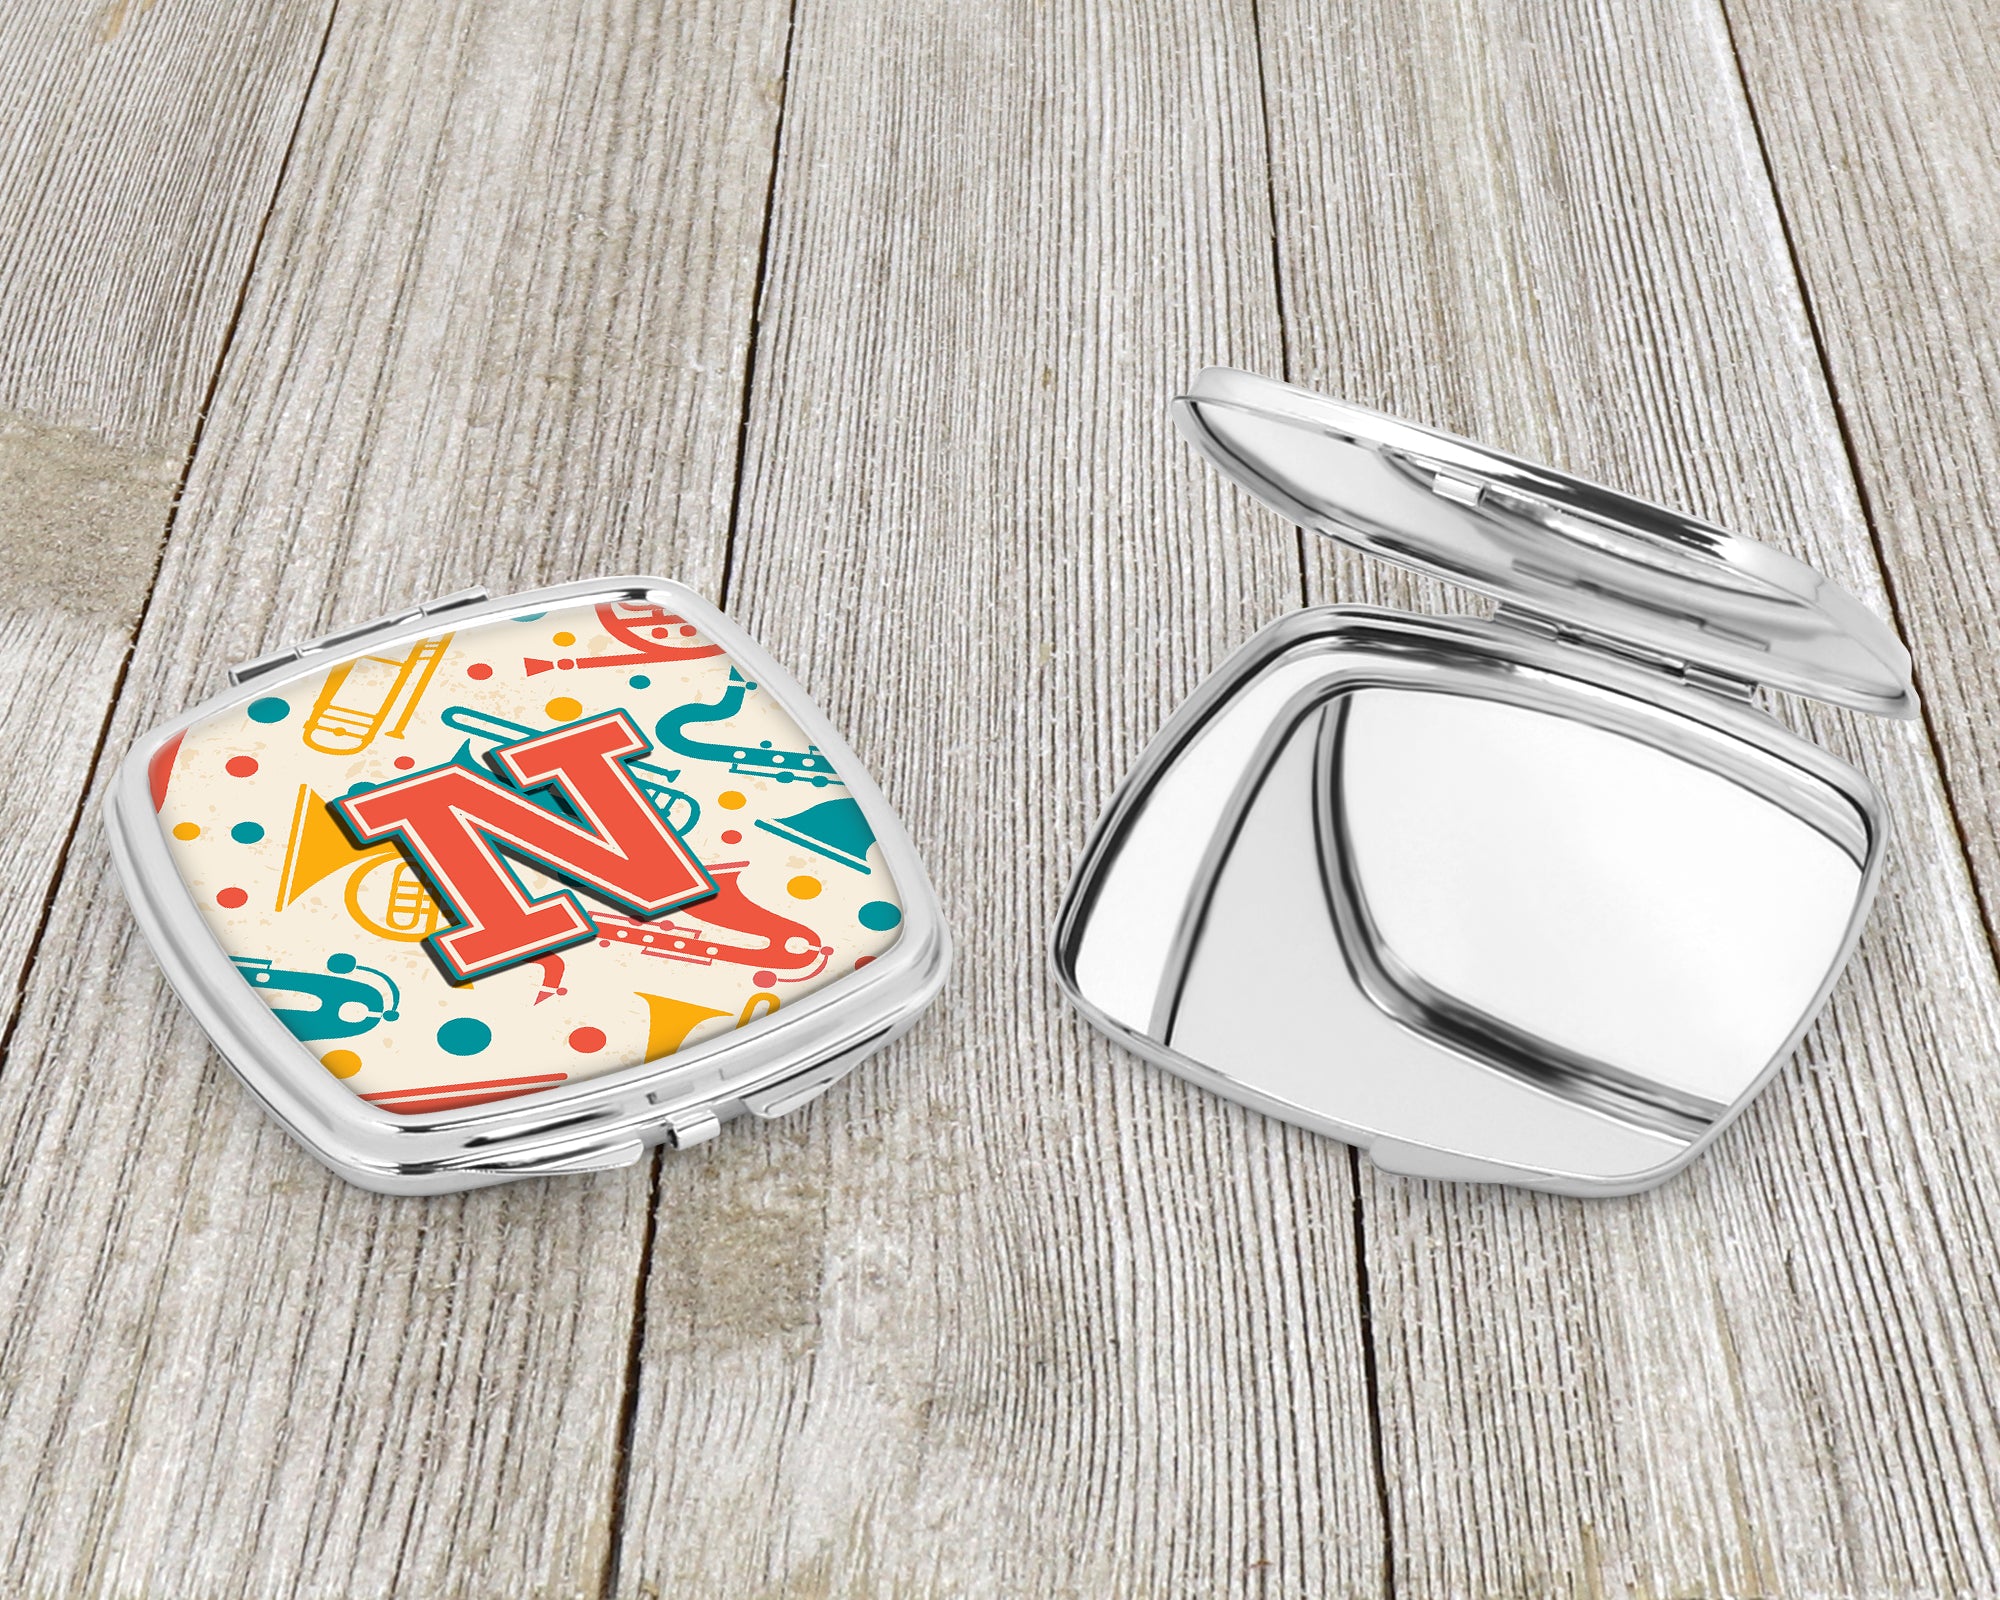 Letter N Retro Teal Orange Musical Instruments Initial Compact Mirror CJ2001-NSCM  the-store.com.